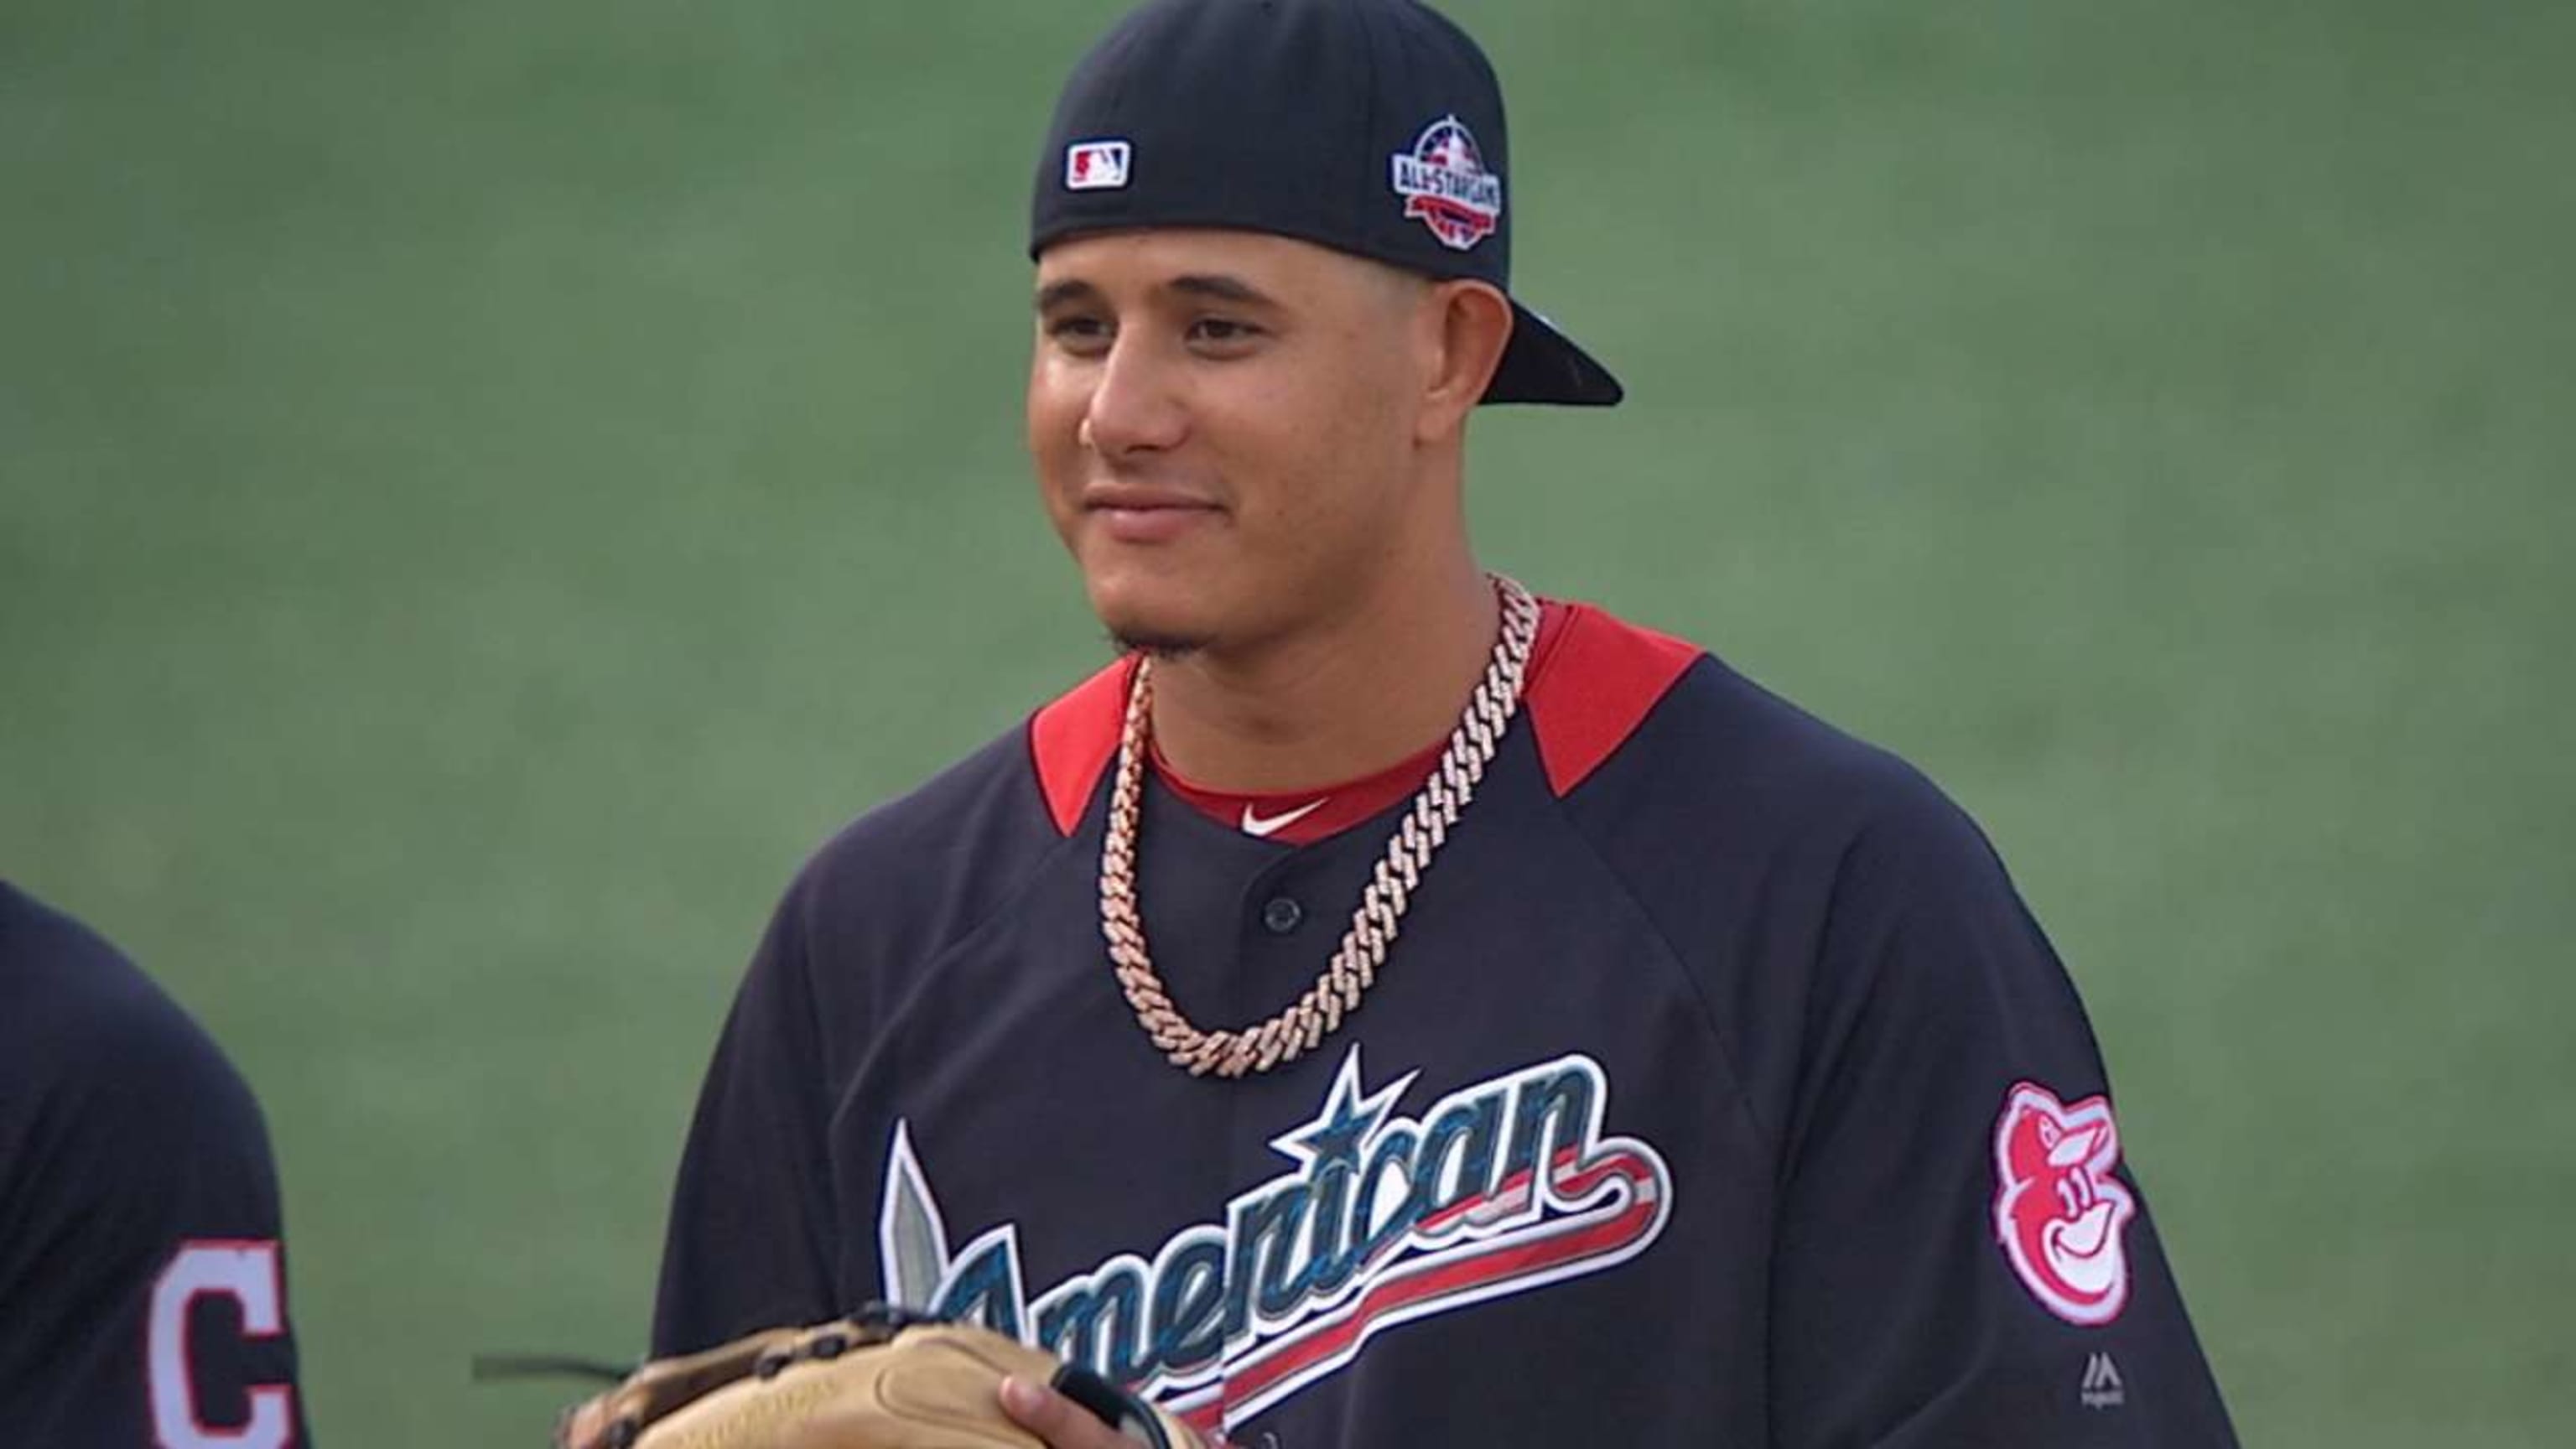 Lakers News: Manny Machado Picked No. 8 Jersey In Homage Of Kobe Bryant